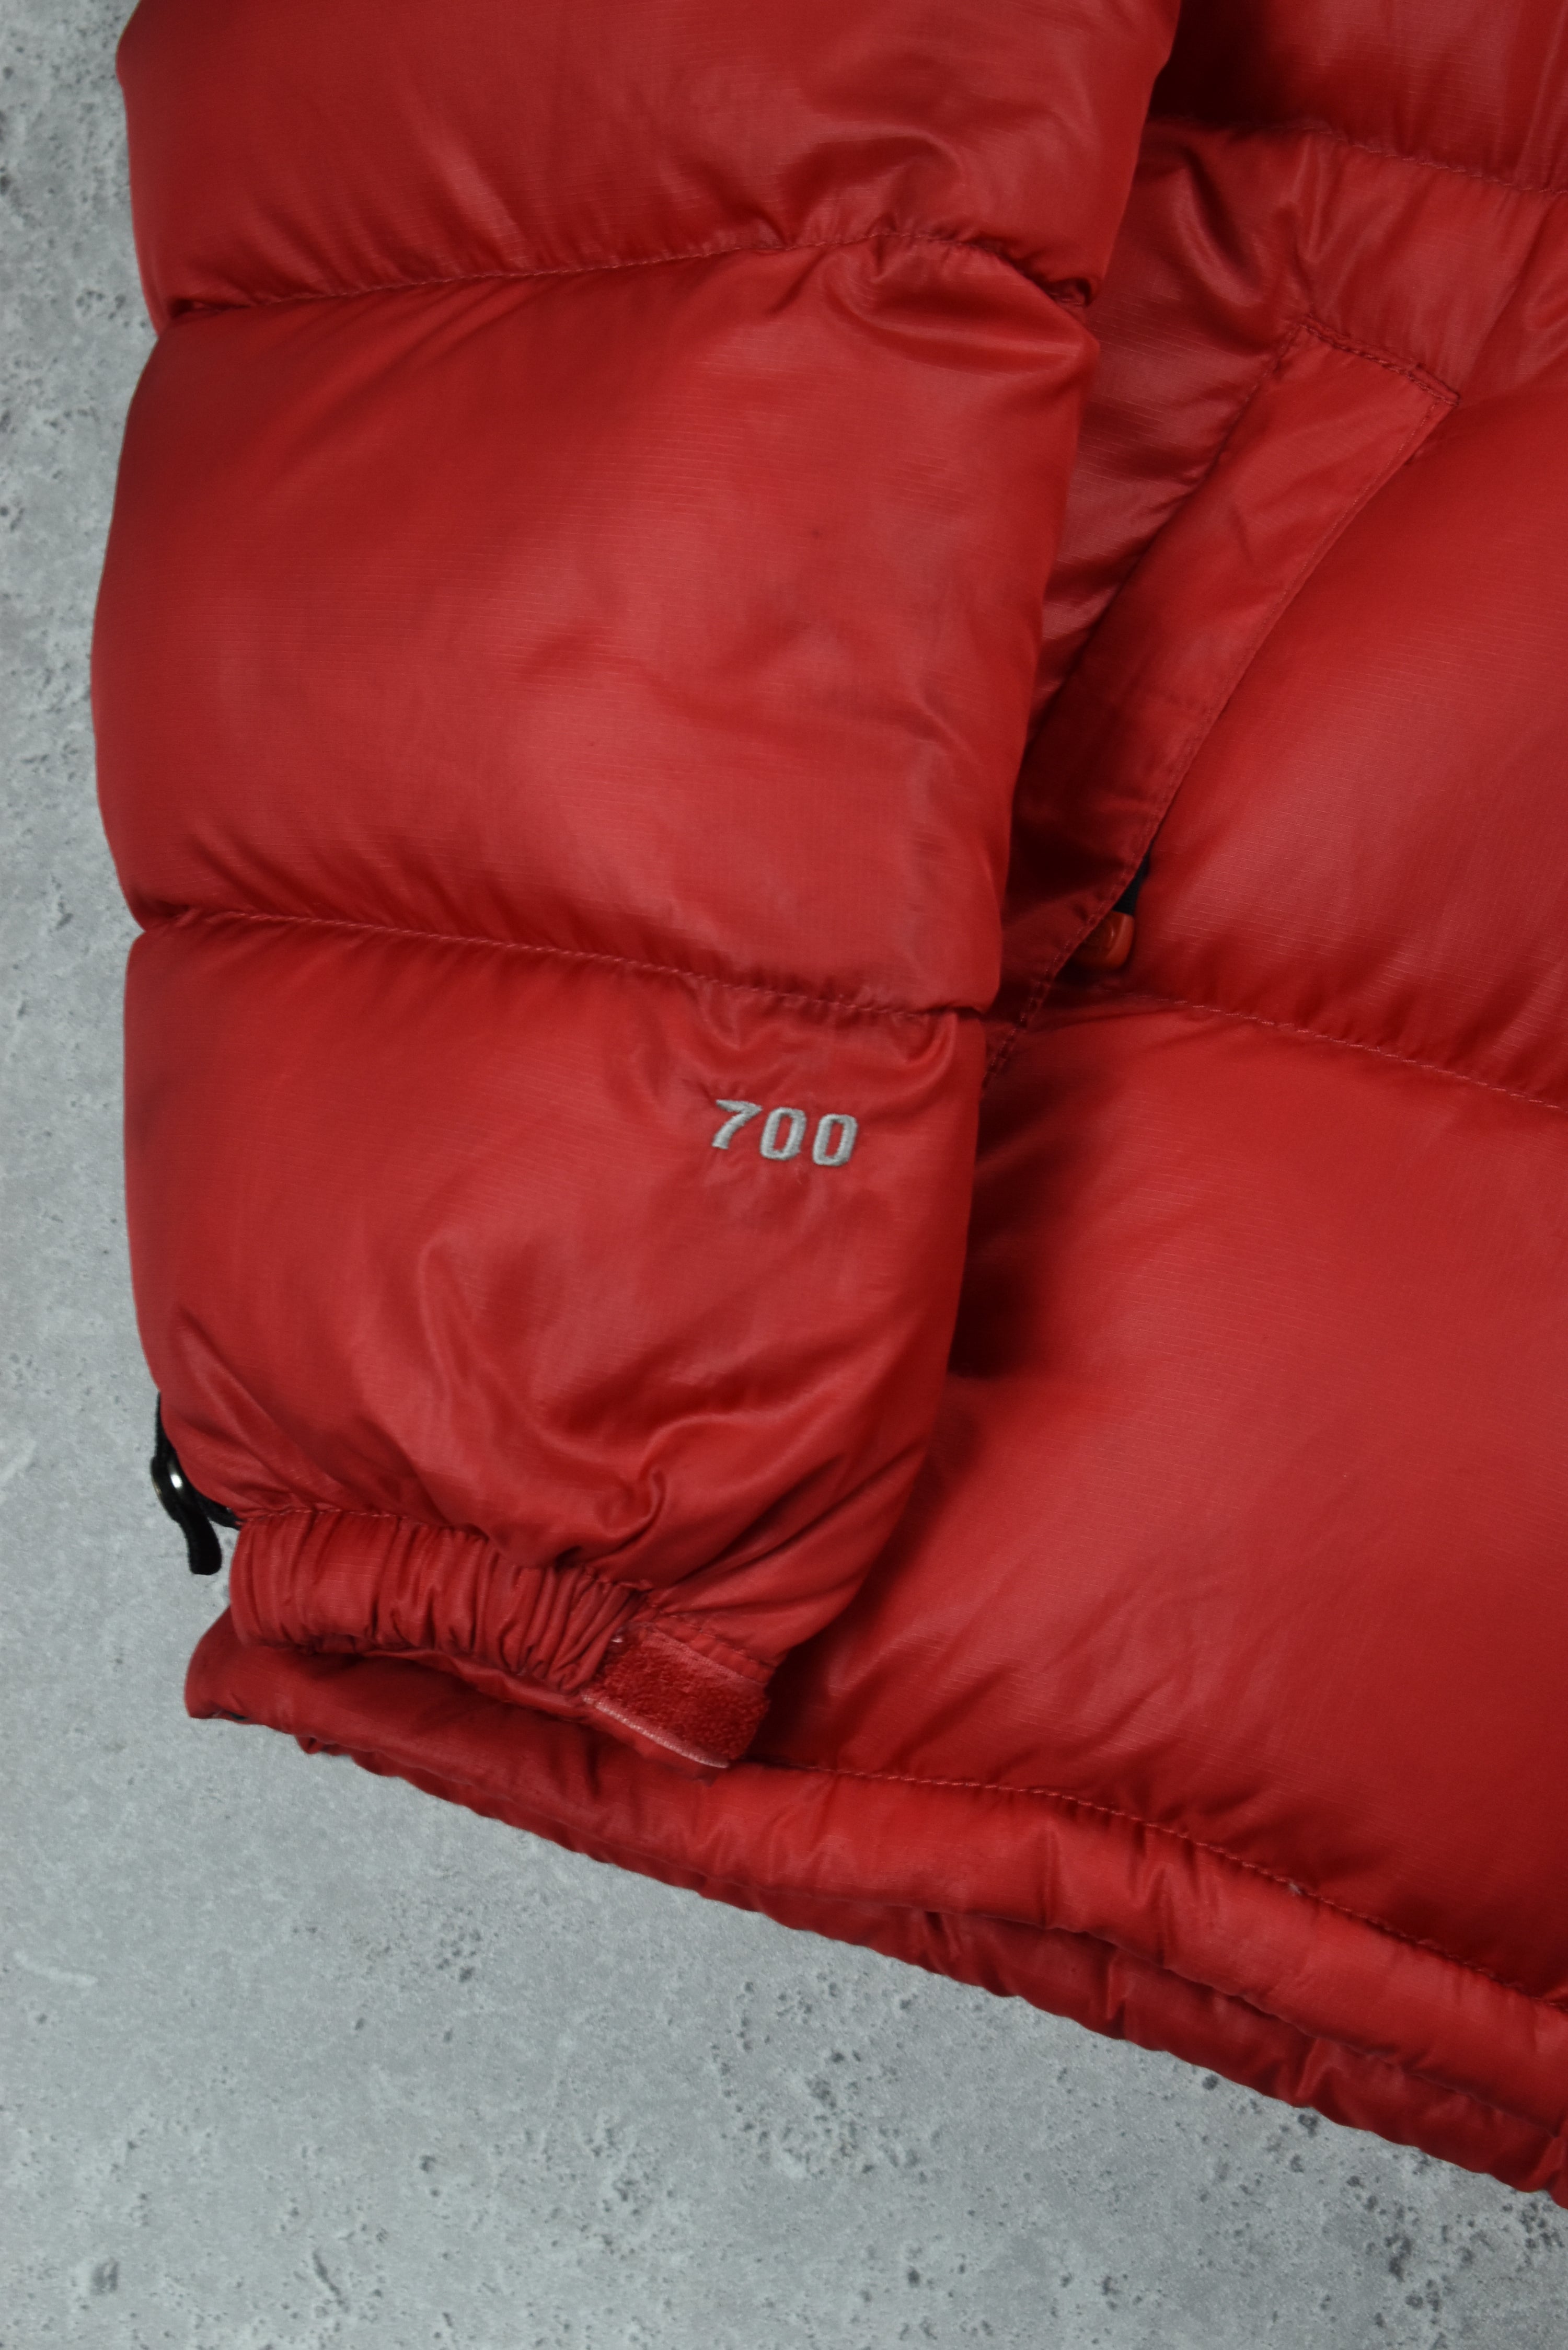 Vintage North Face 700 Nuptse Puffer Red Xlarge